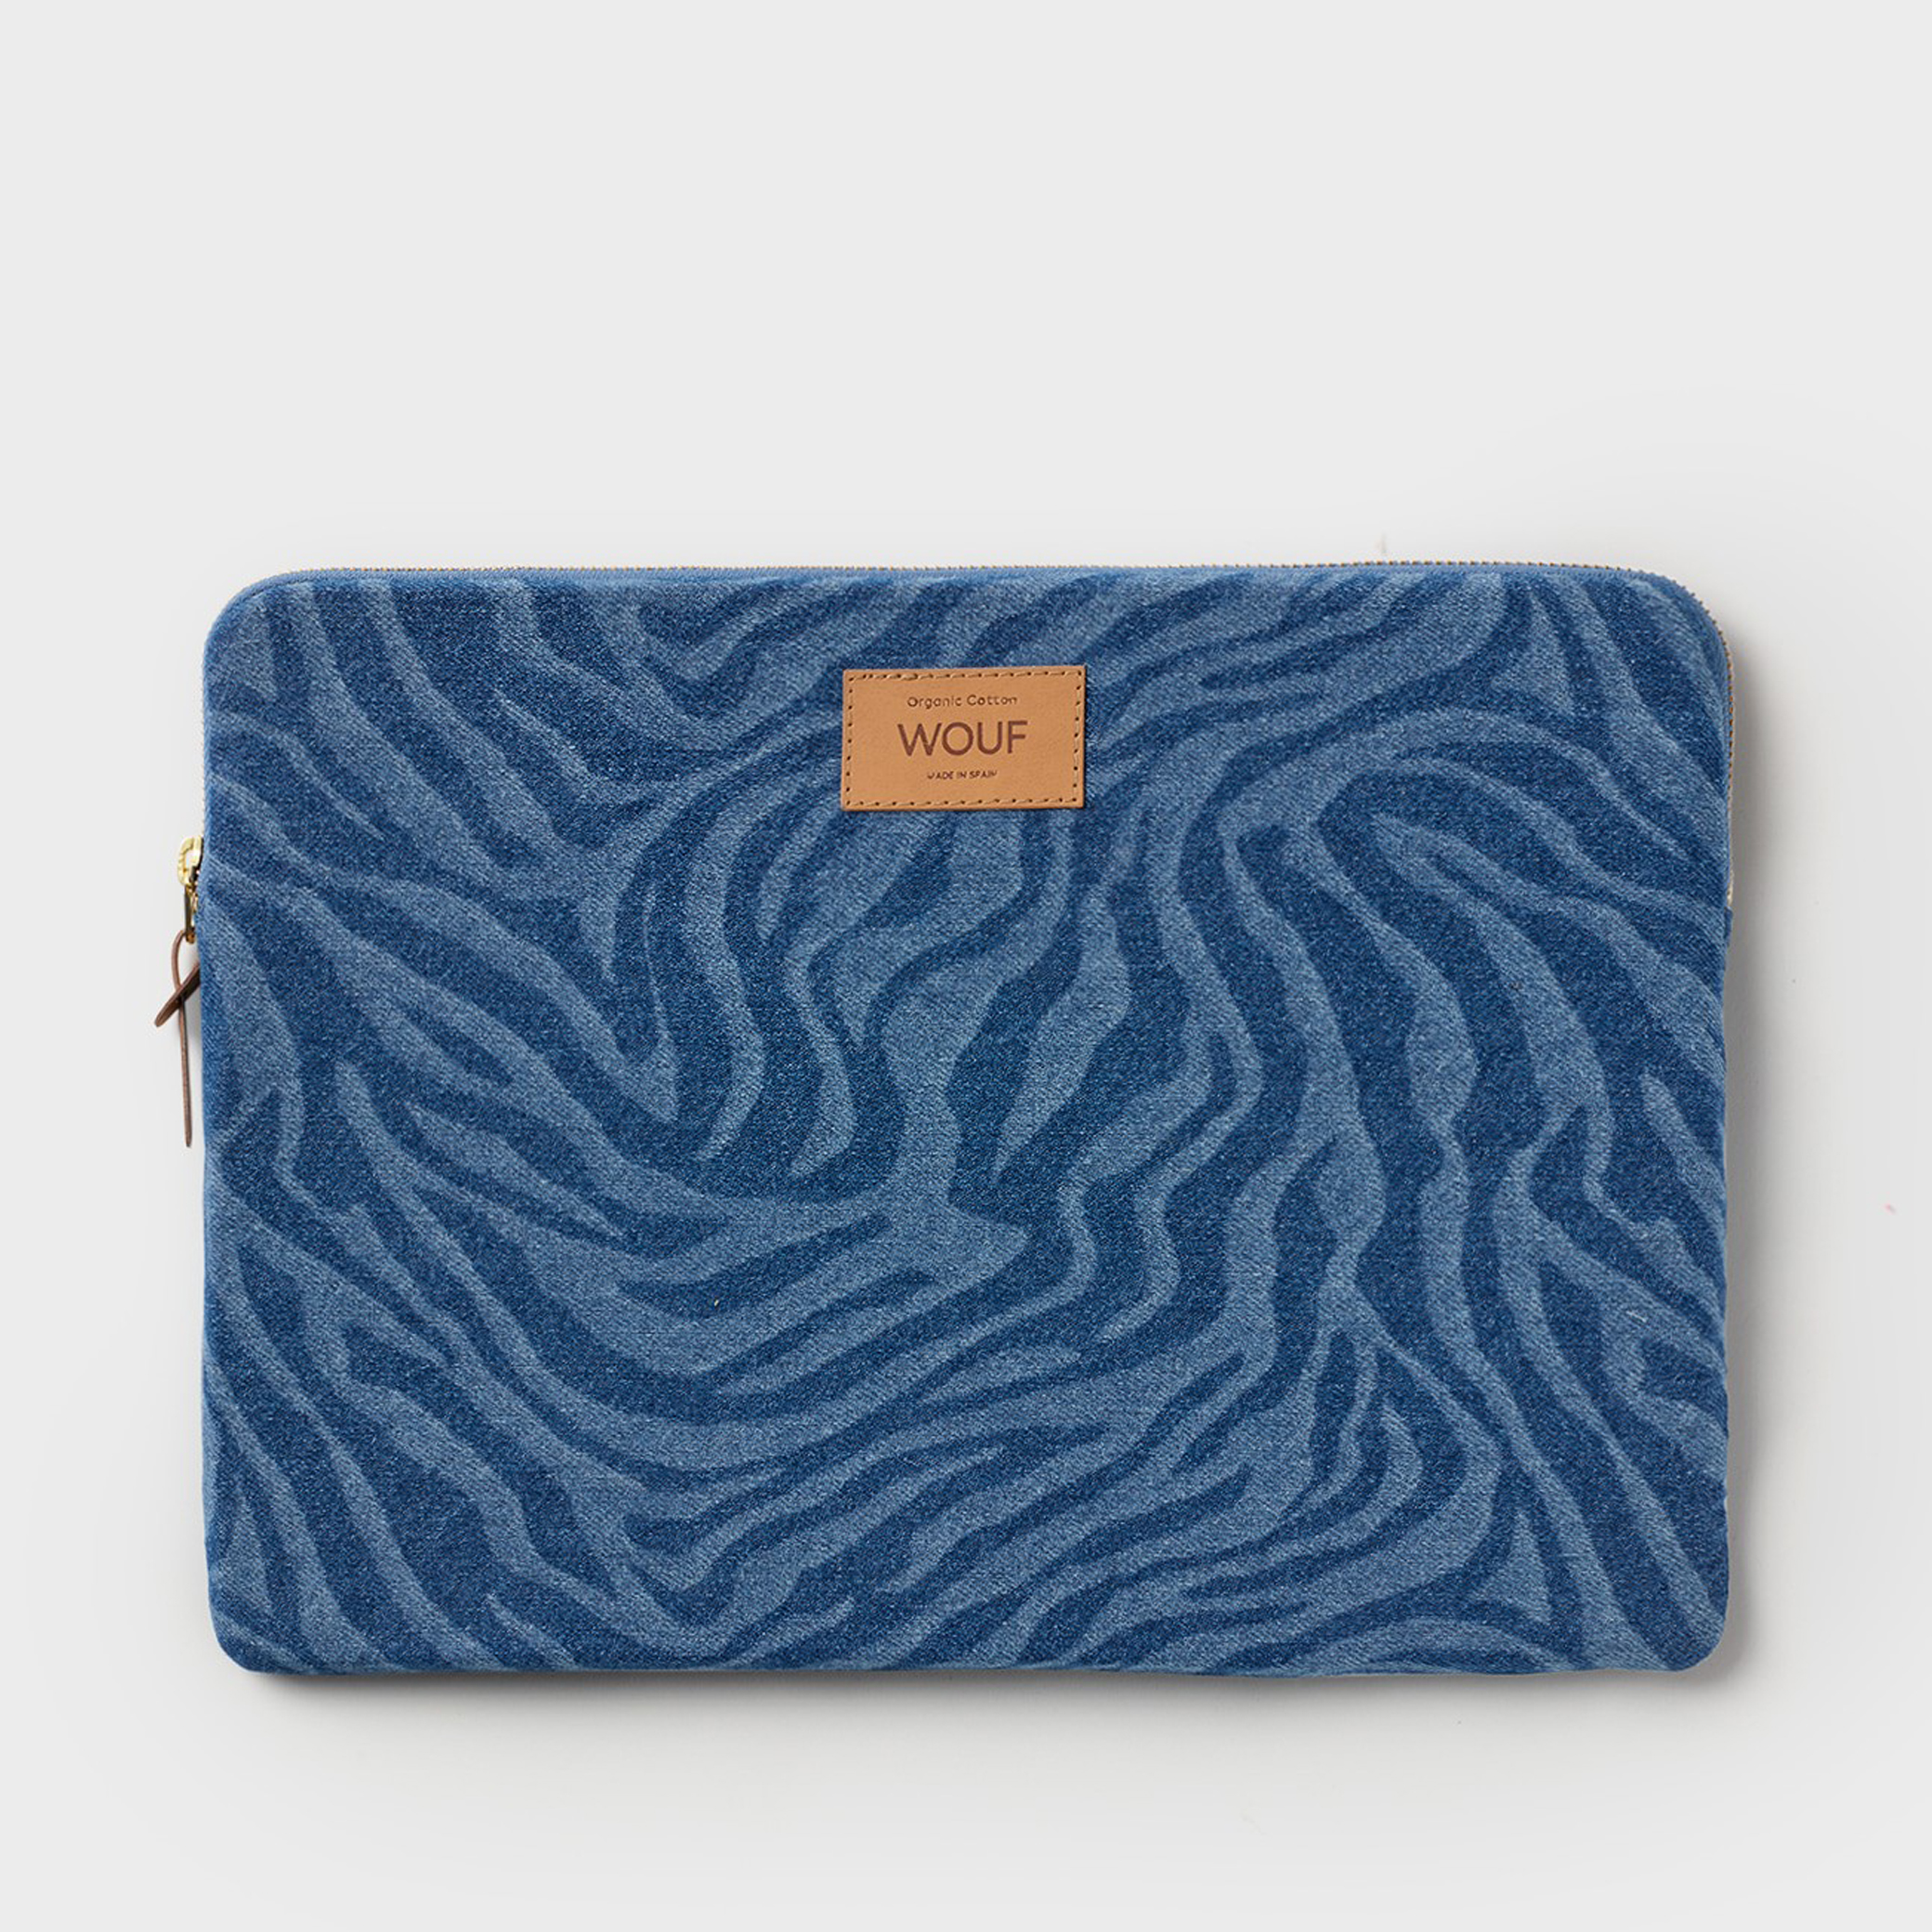 wouf-sierra-laptop-sleeve-13-and-14